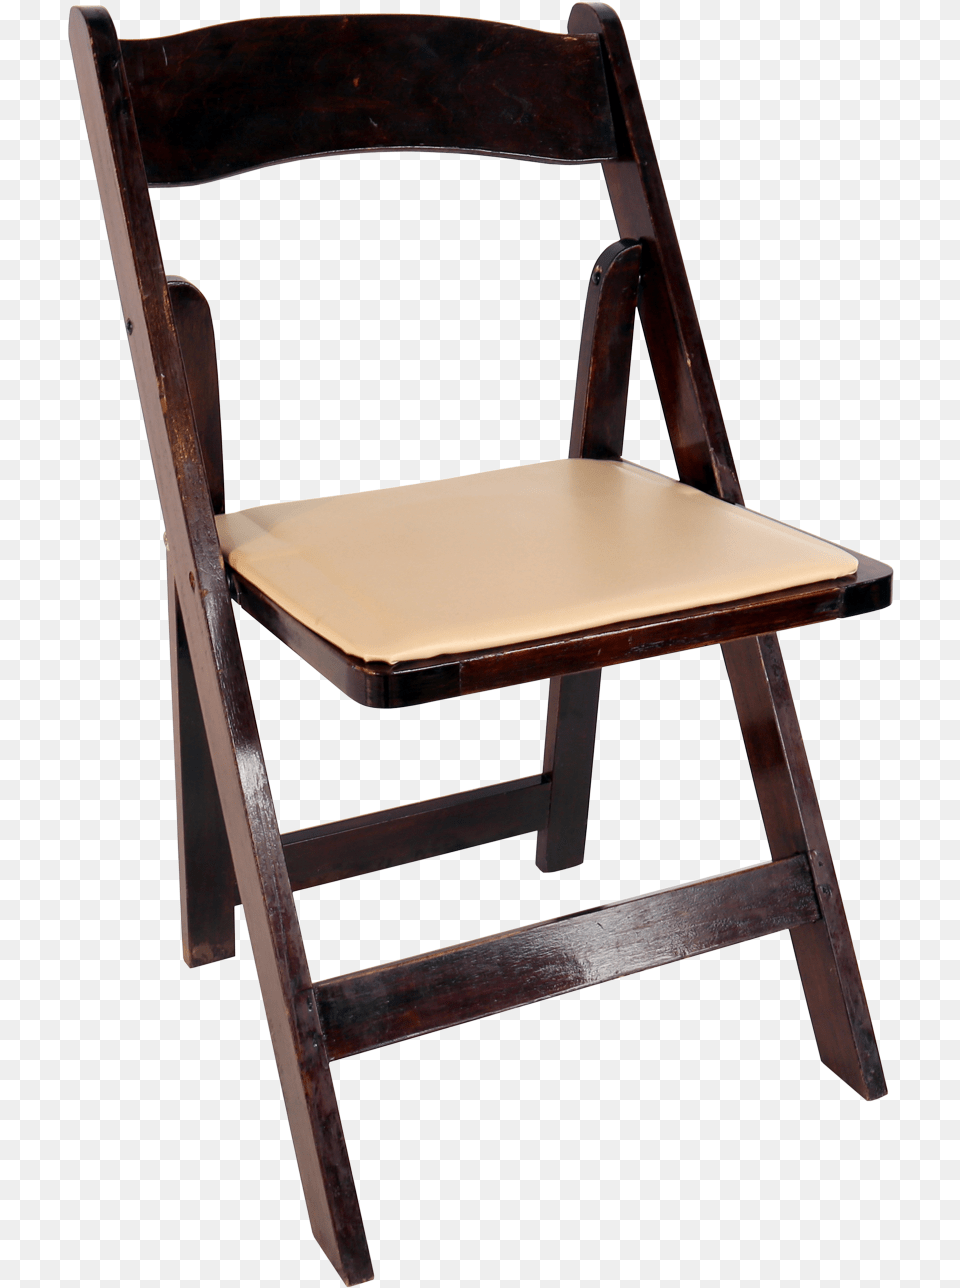 Chair Fruitwood Folding Folding Resin Chair Fruitwood, Furniture, Canvas Png